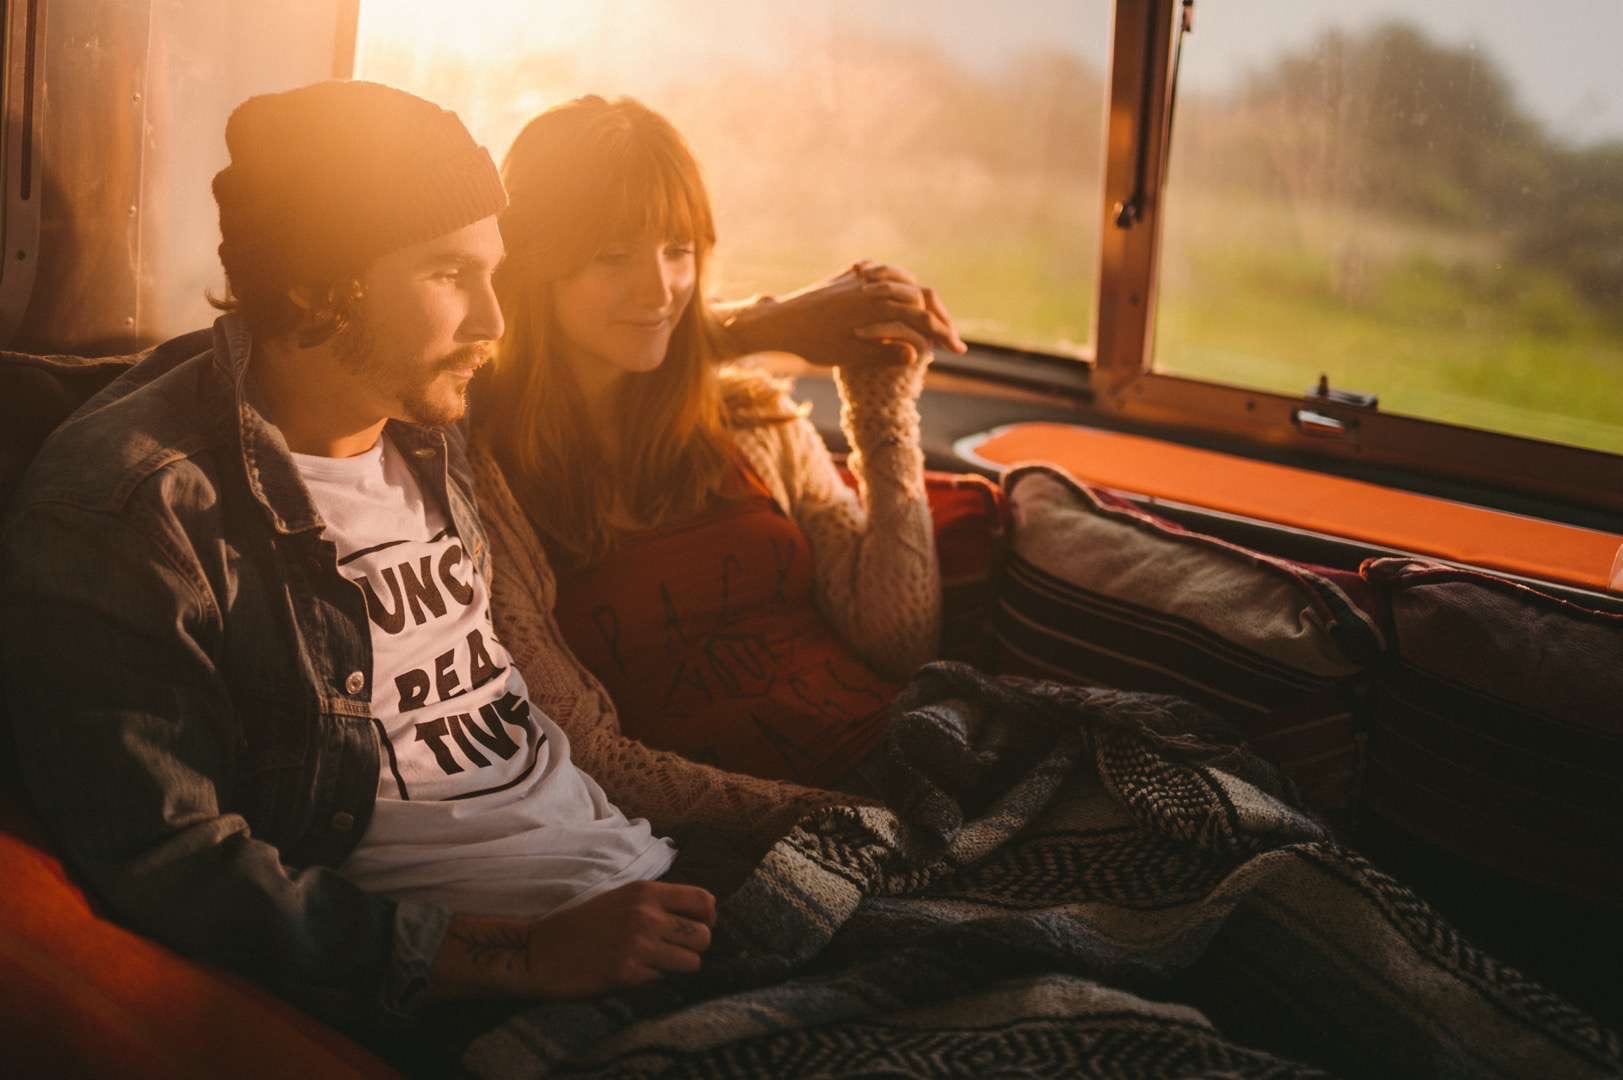 Young man with a tattoo and a young woman relaxing at sunset on a red small couch in a RV.